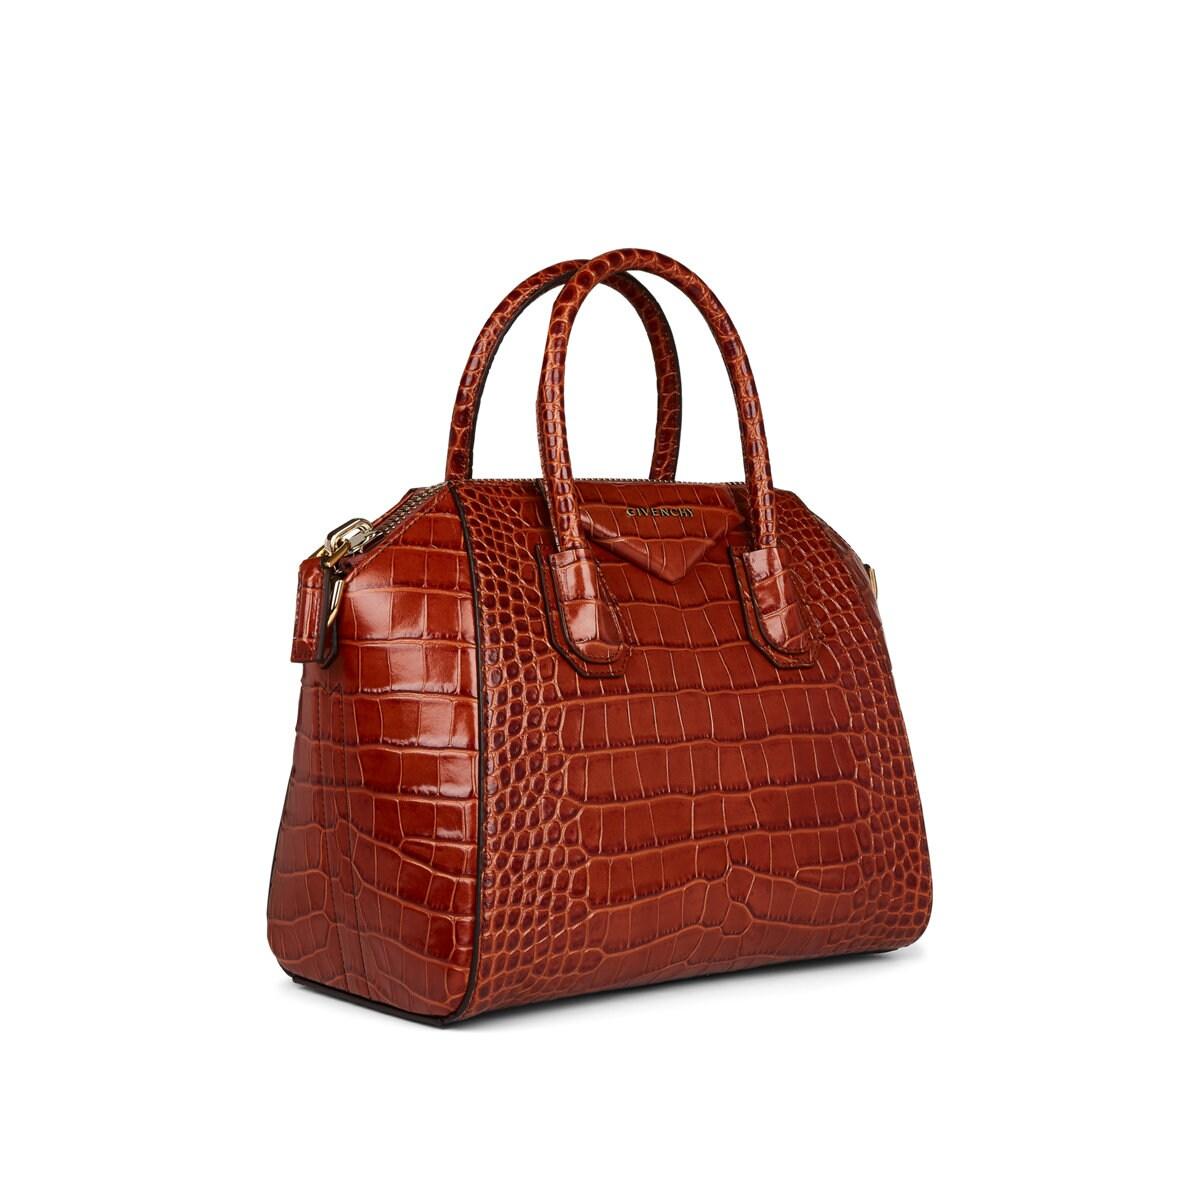 Givenchy Antigona Small Crocodile-stamped Leather Duffel Bag in Cognac (Red) - Lyst